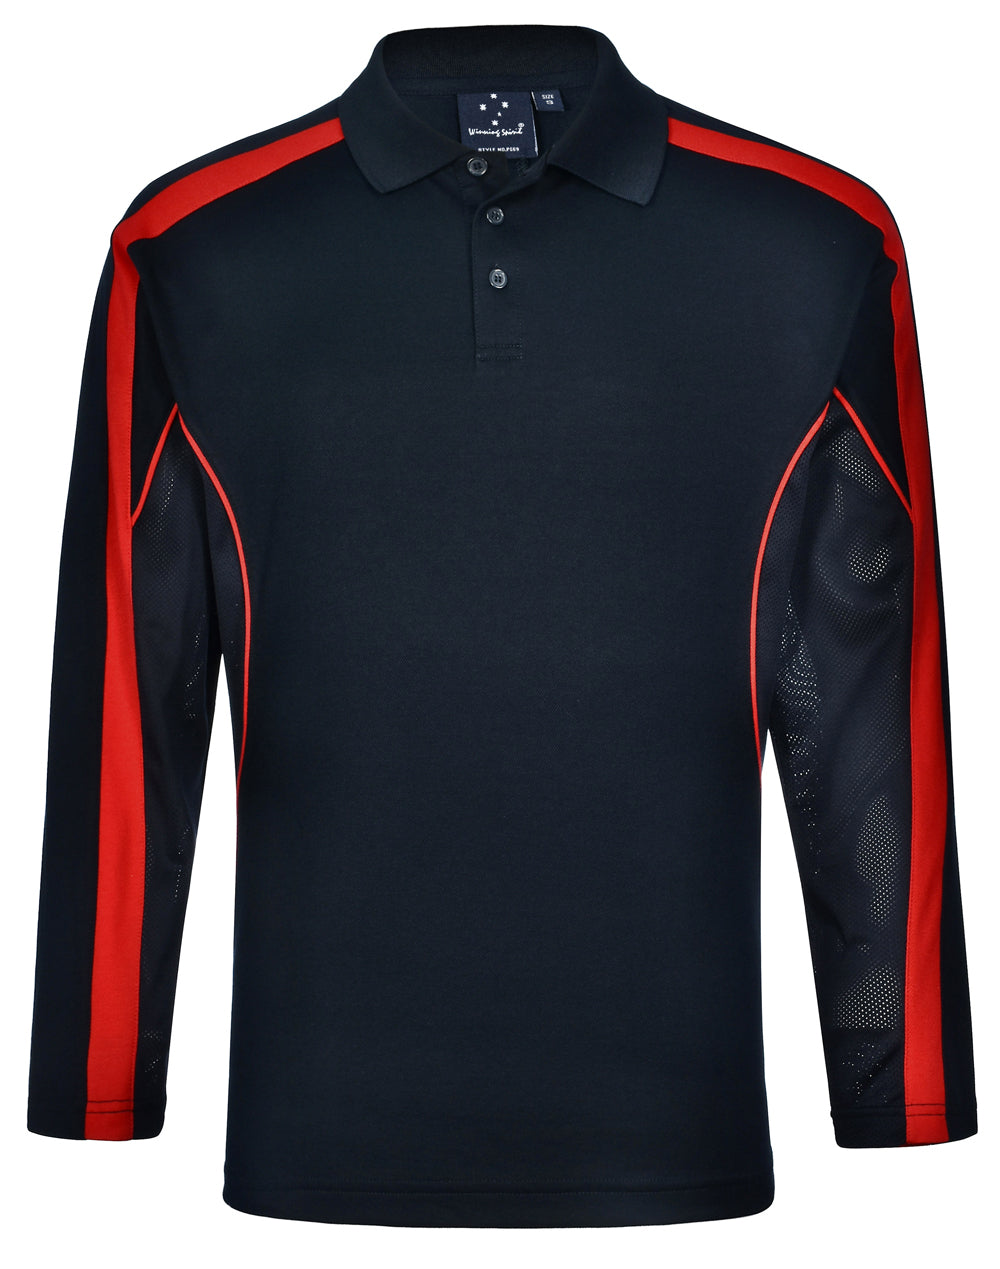 a black and red polo shirt with red trims